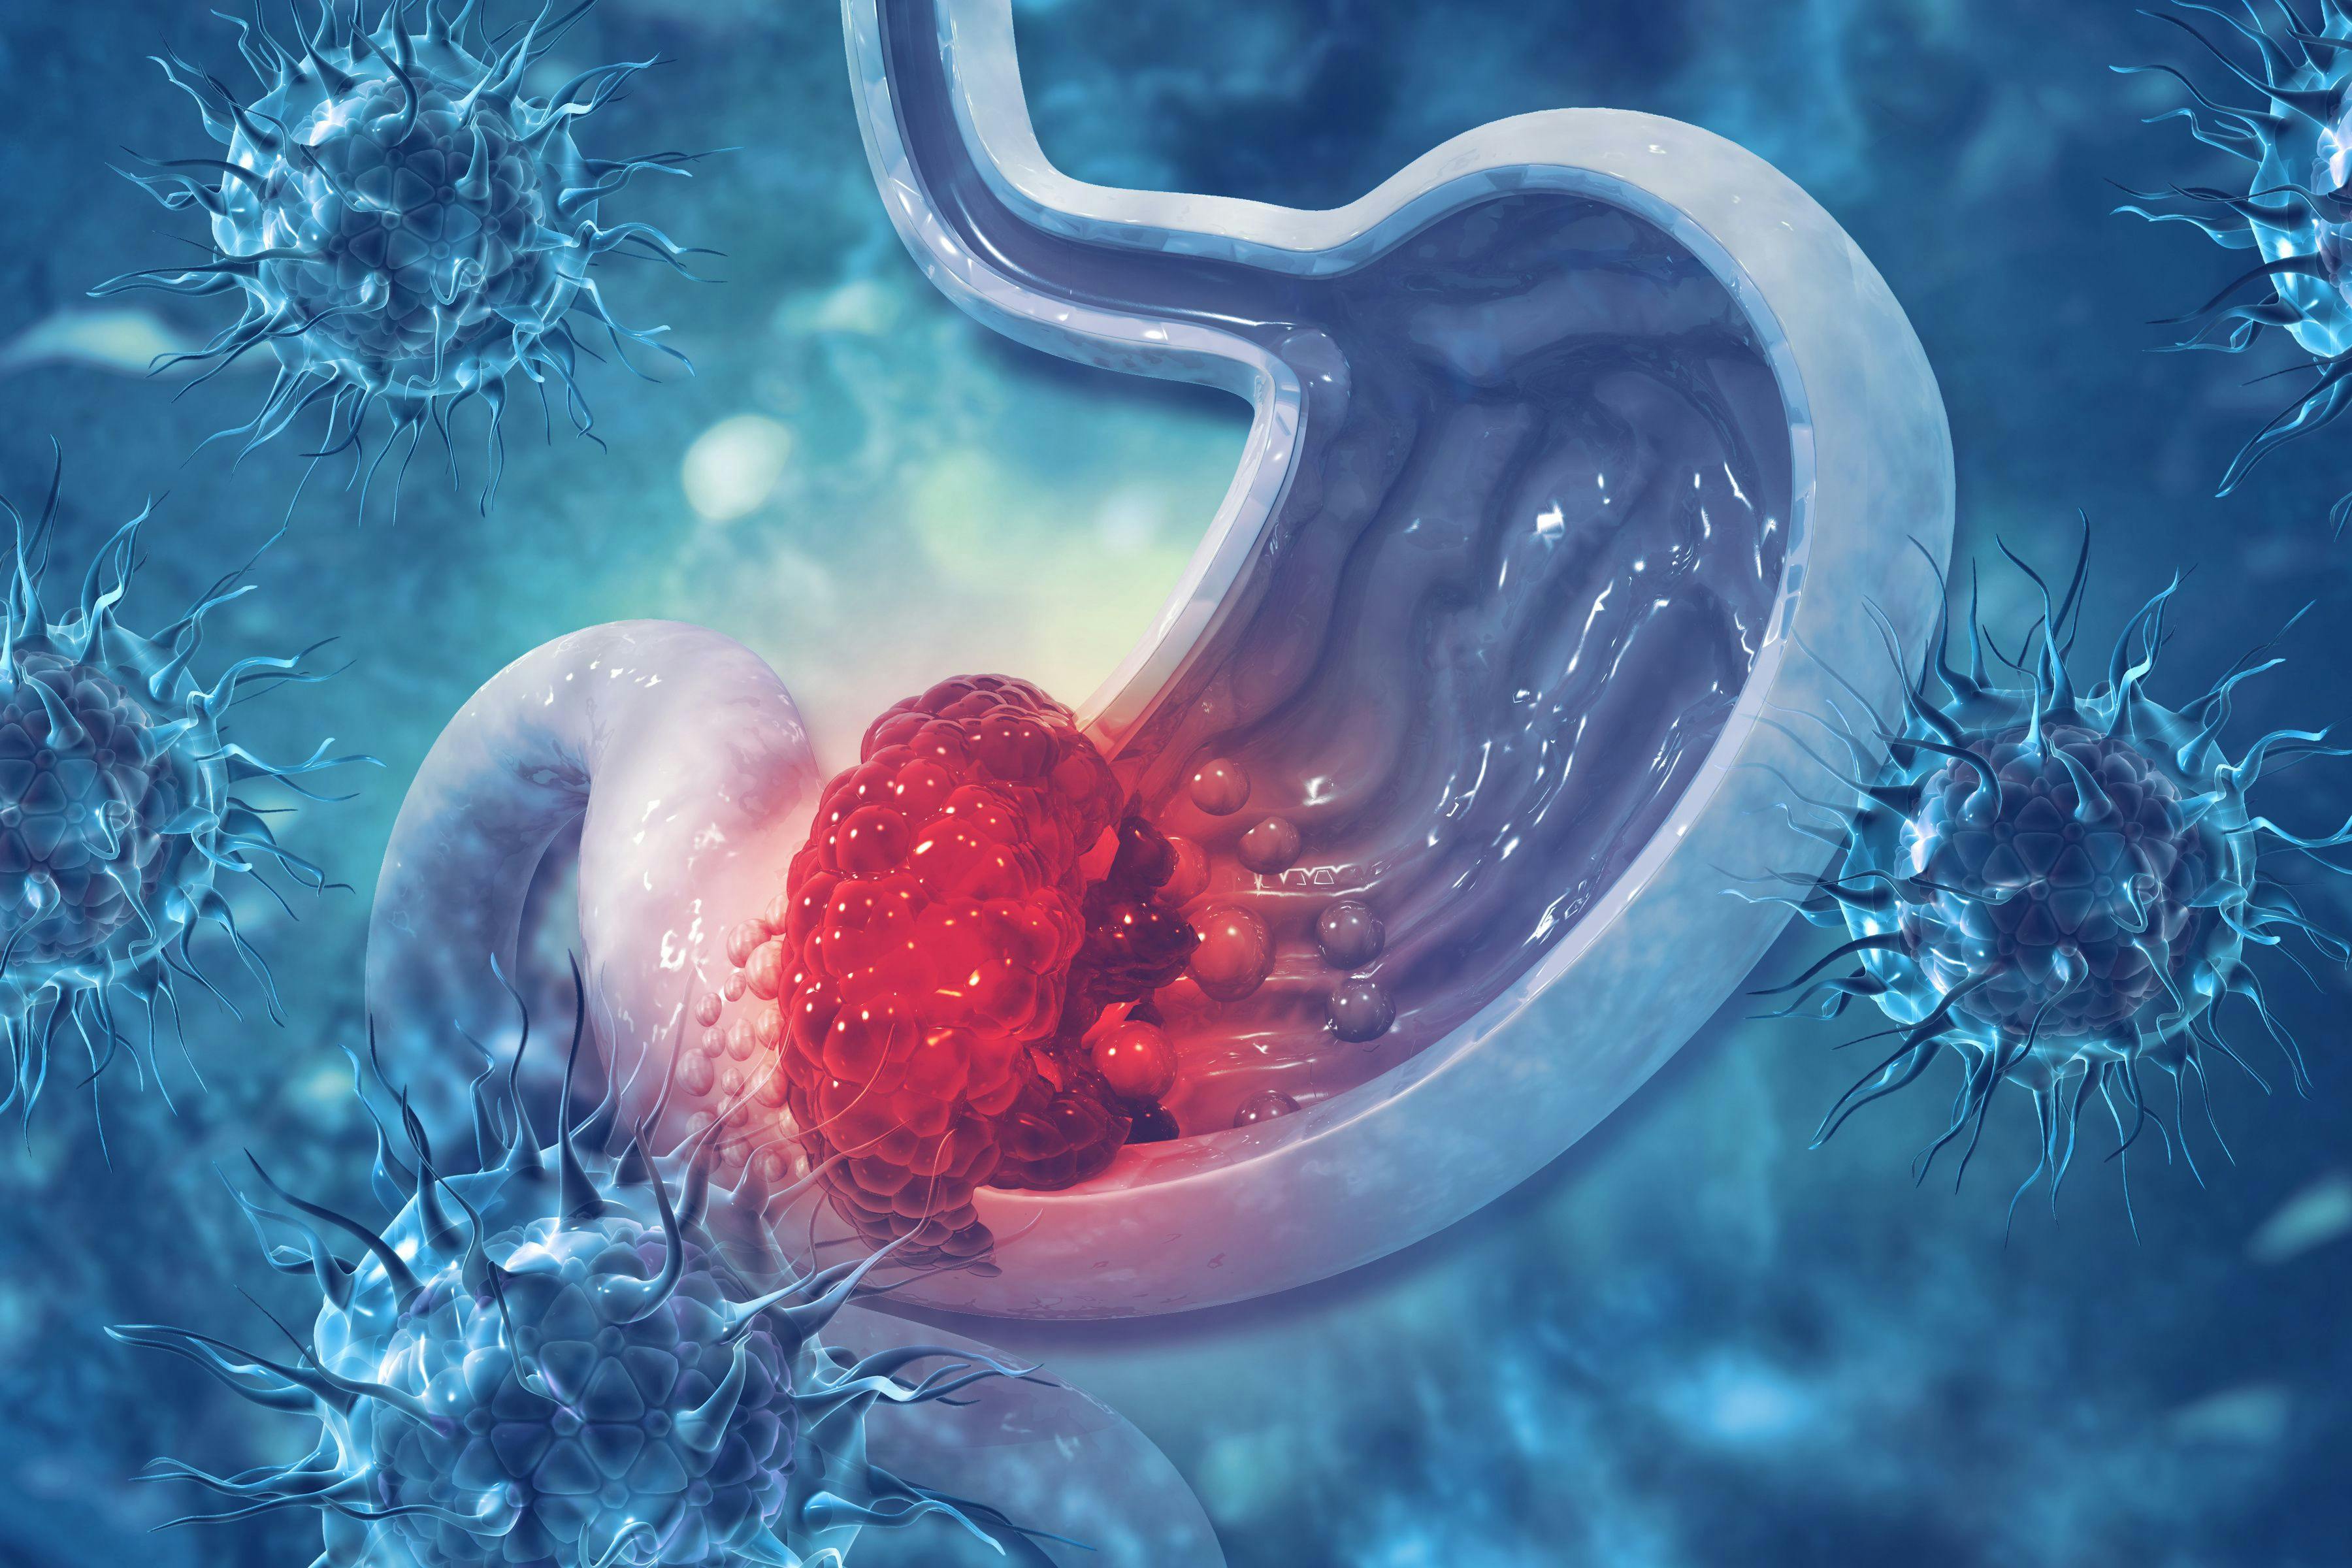 Cancer attacking cell. Stomach disease concept | Image Credit: Crystal light -www.stock.adobe.com